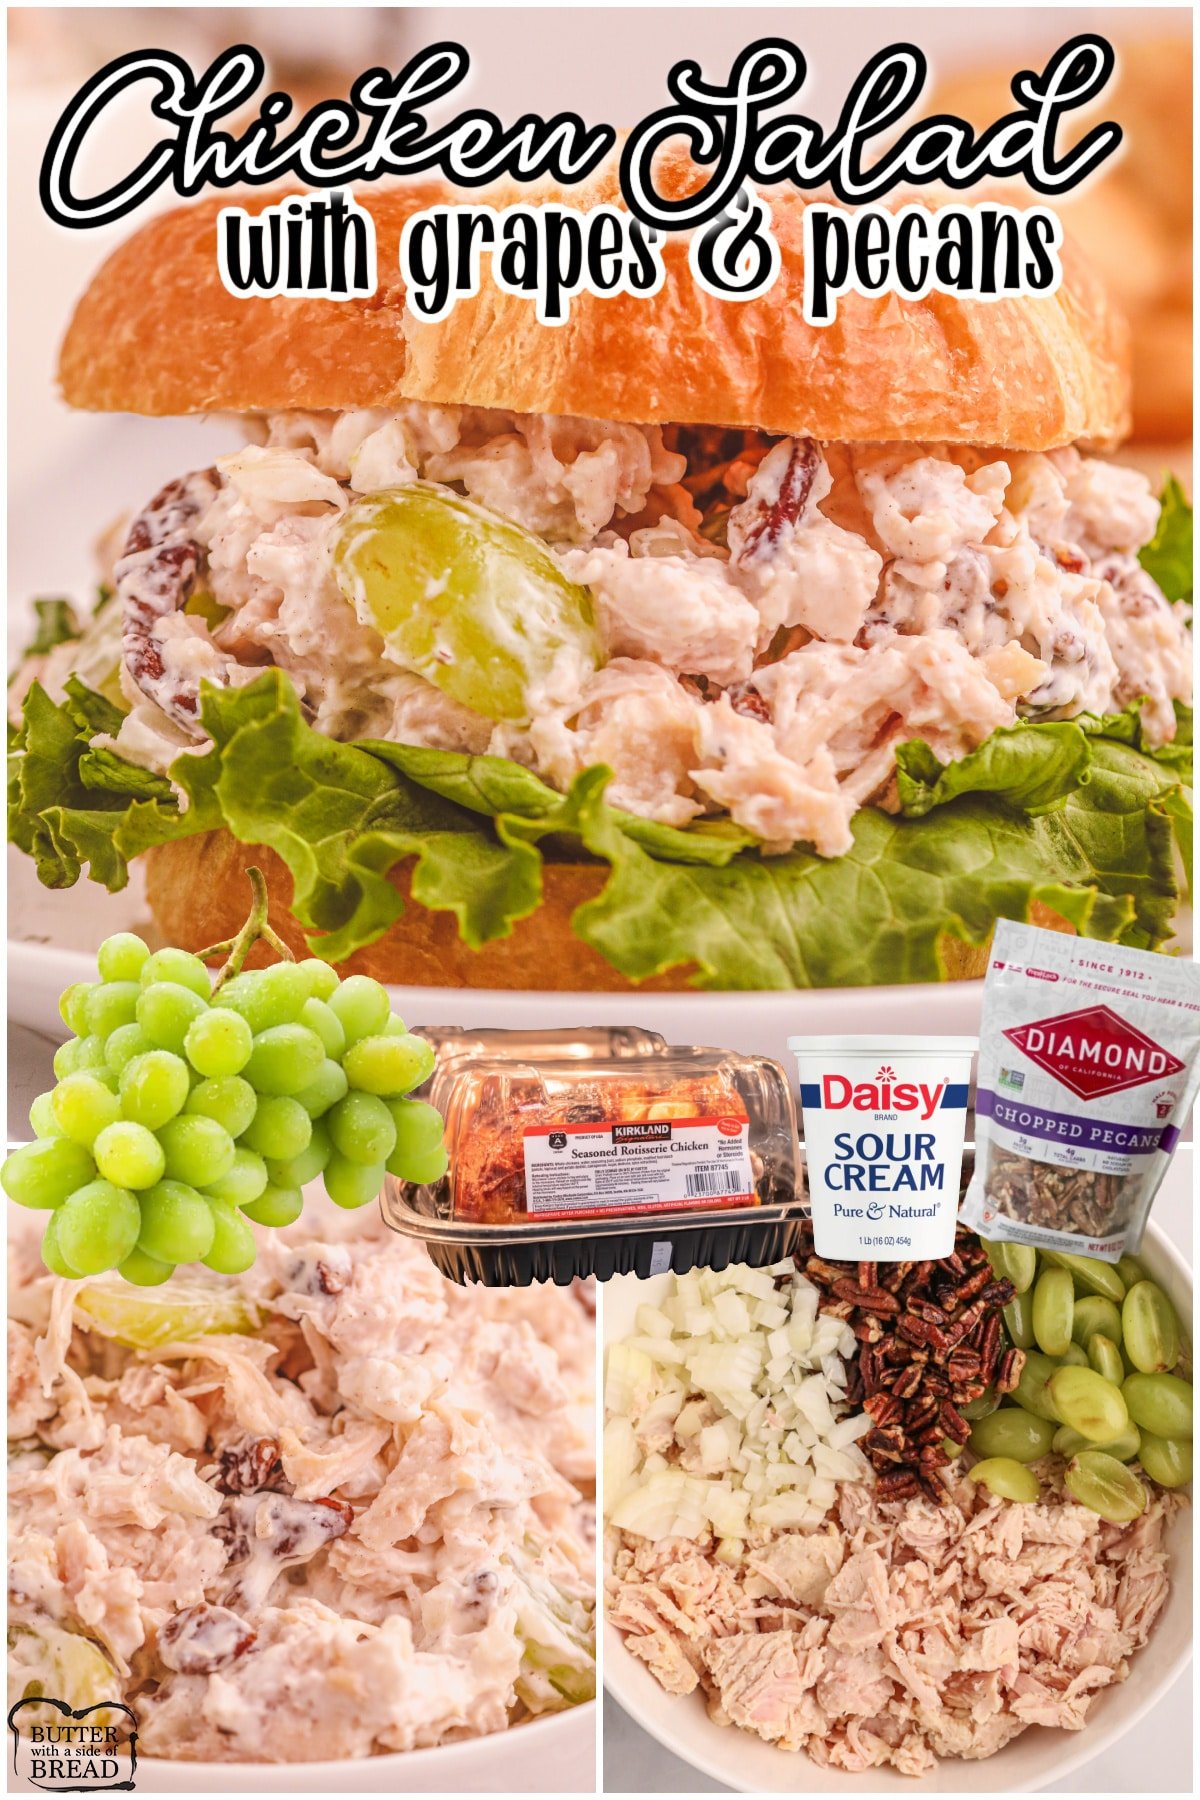 Chicken Salad with Grapes and Pecans is a delicious variation on a classic chicken salad recipe!  Packed with hearty chicken, juicy fruit & an amazing dressing, this chicken salad with nuts is perfect!